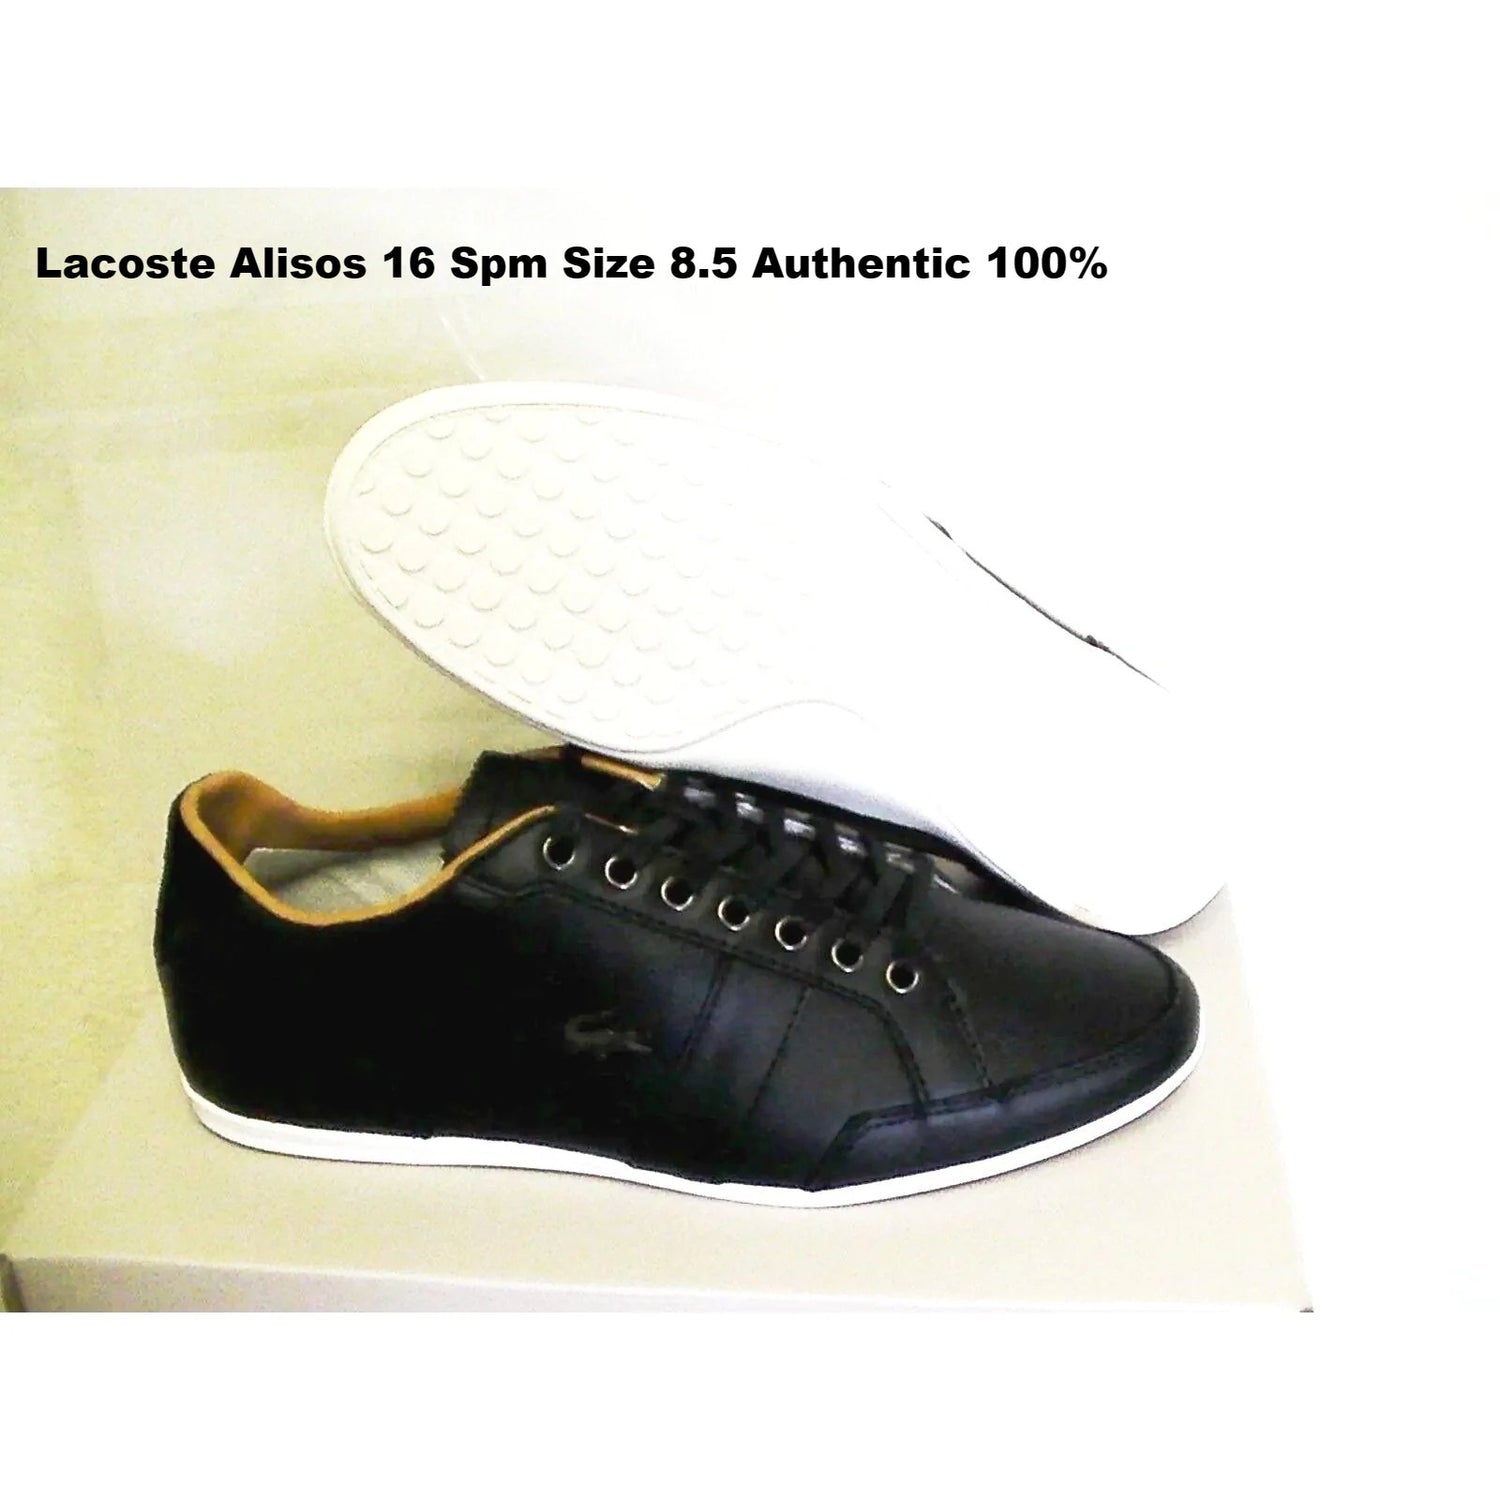 Lacoste casual shoes alisos 16 spm black leather size 8.5 us new with box - Classic Fashion Deals